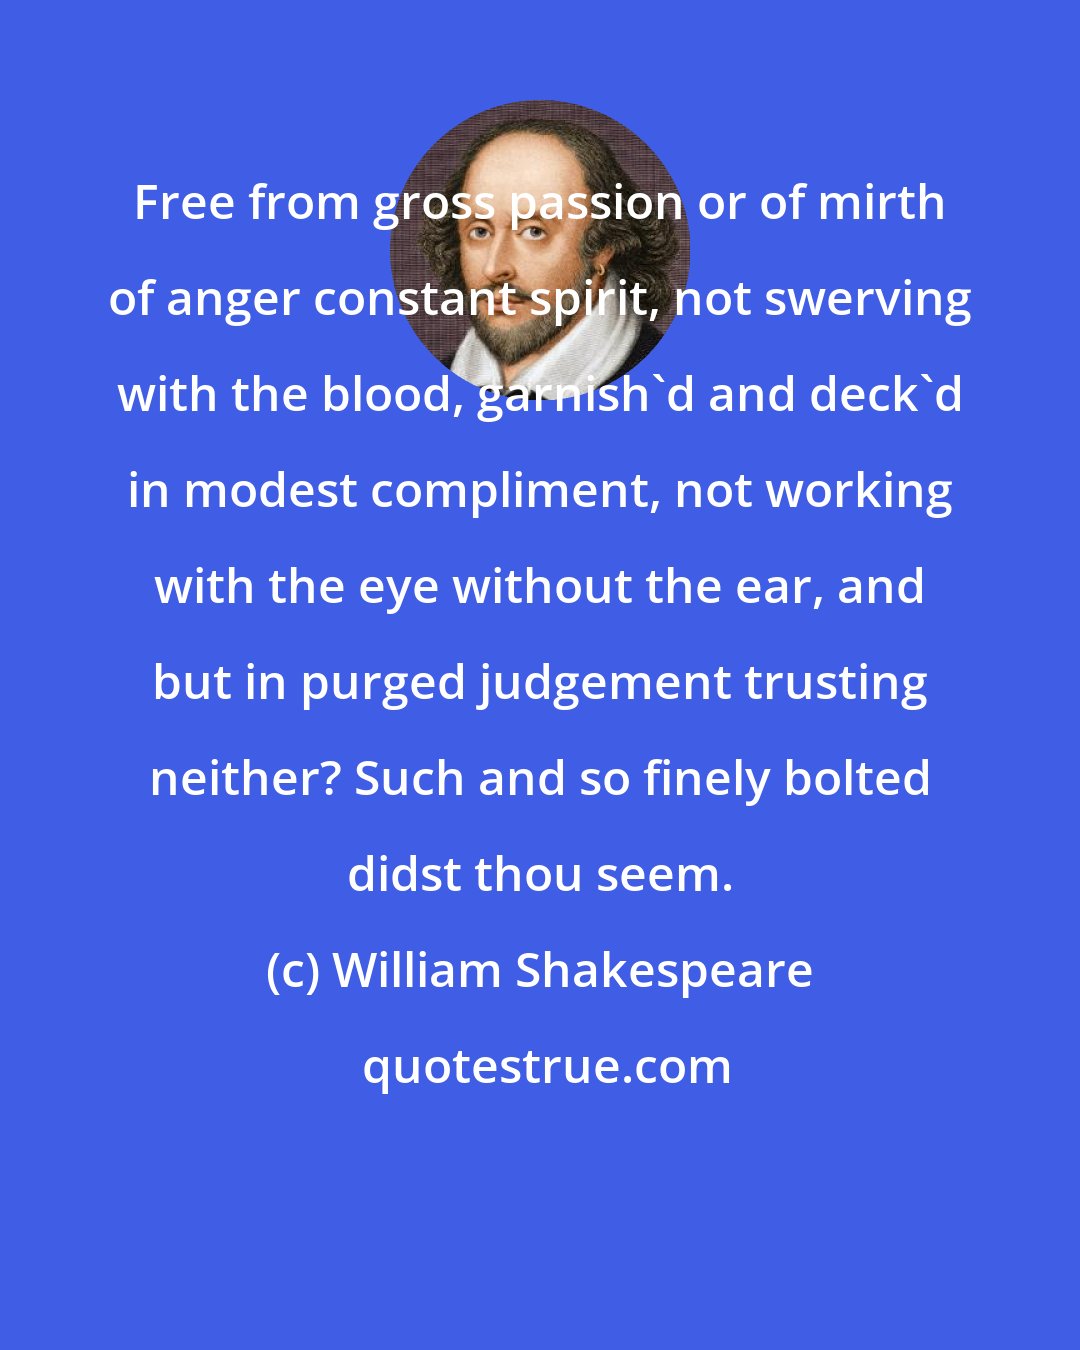 William Shakespeare: Free from gross passion or of mirth of anger constant spirit, not swerving with the blood, garnish'd and deck'd in modest compliment, not working with the eye without the ear, and but in purged judgement trusting neither? Such and so finely bolted didst thou seem.